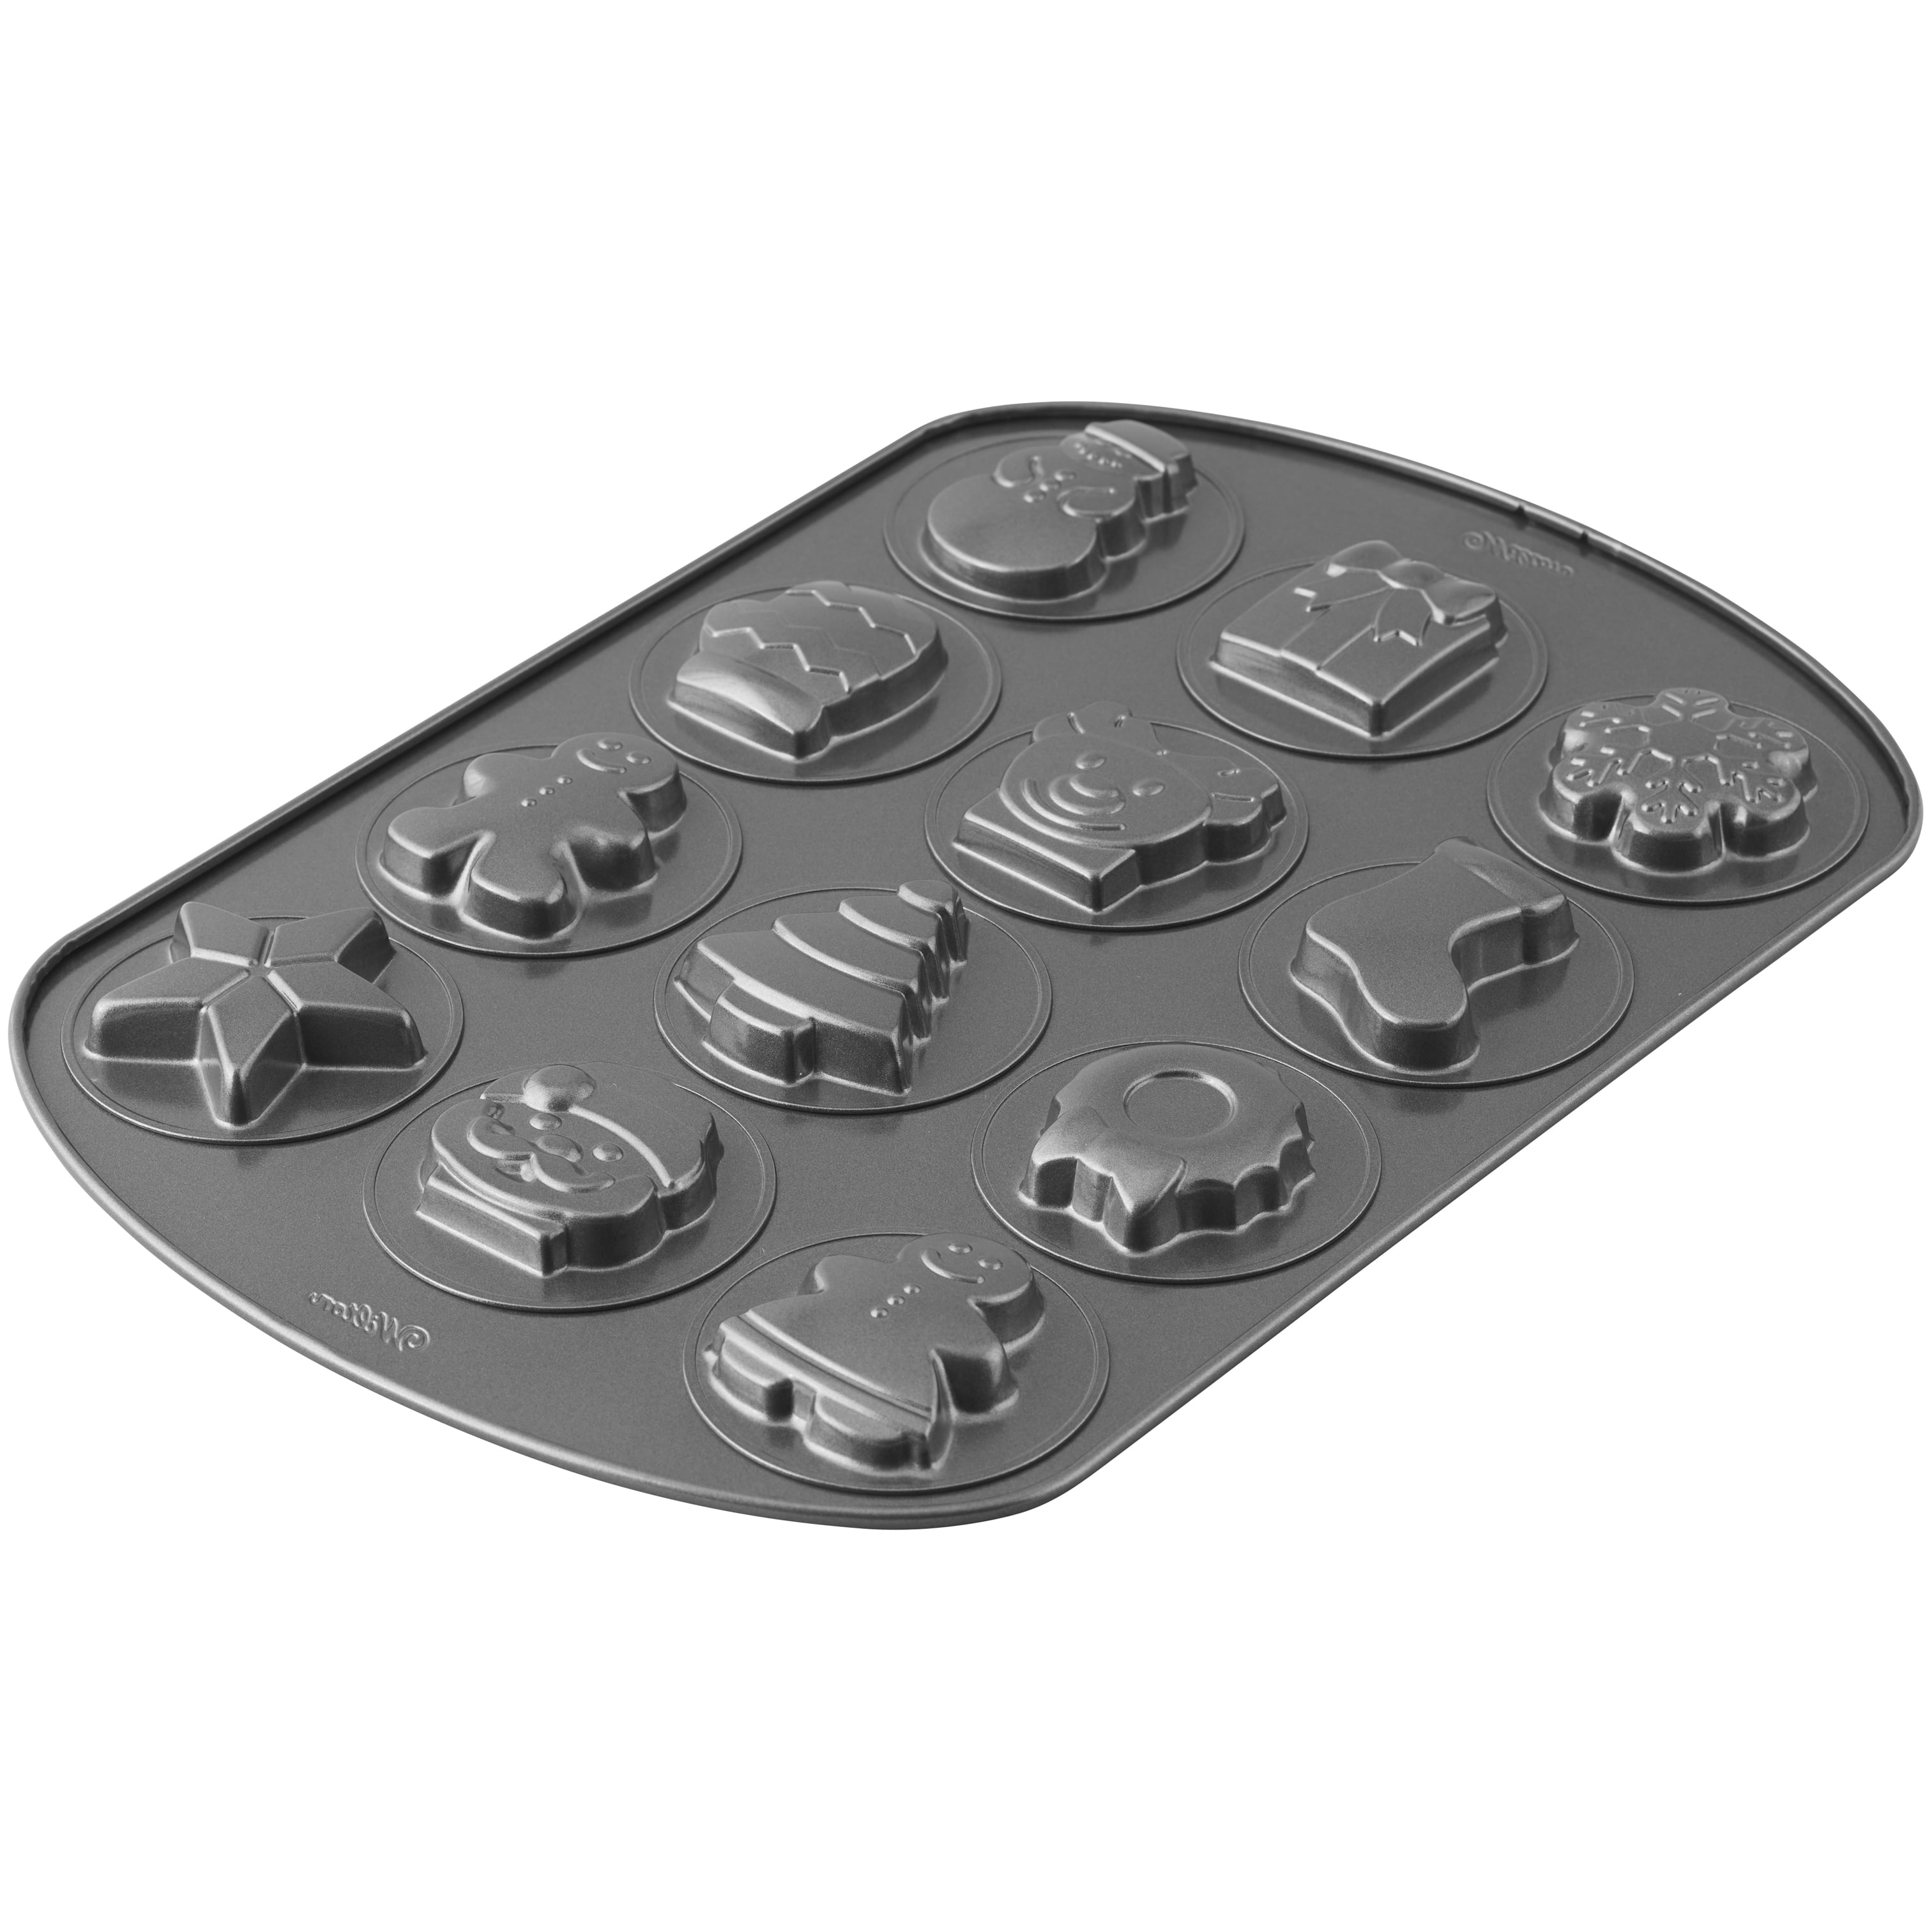 CHRISTMAS COOKIE PAN 12 Cavity Cookie Pan All Different Designs up to 2 1/2  17 X 11 Cookie Pan 